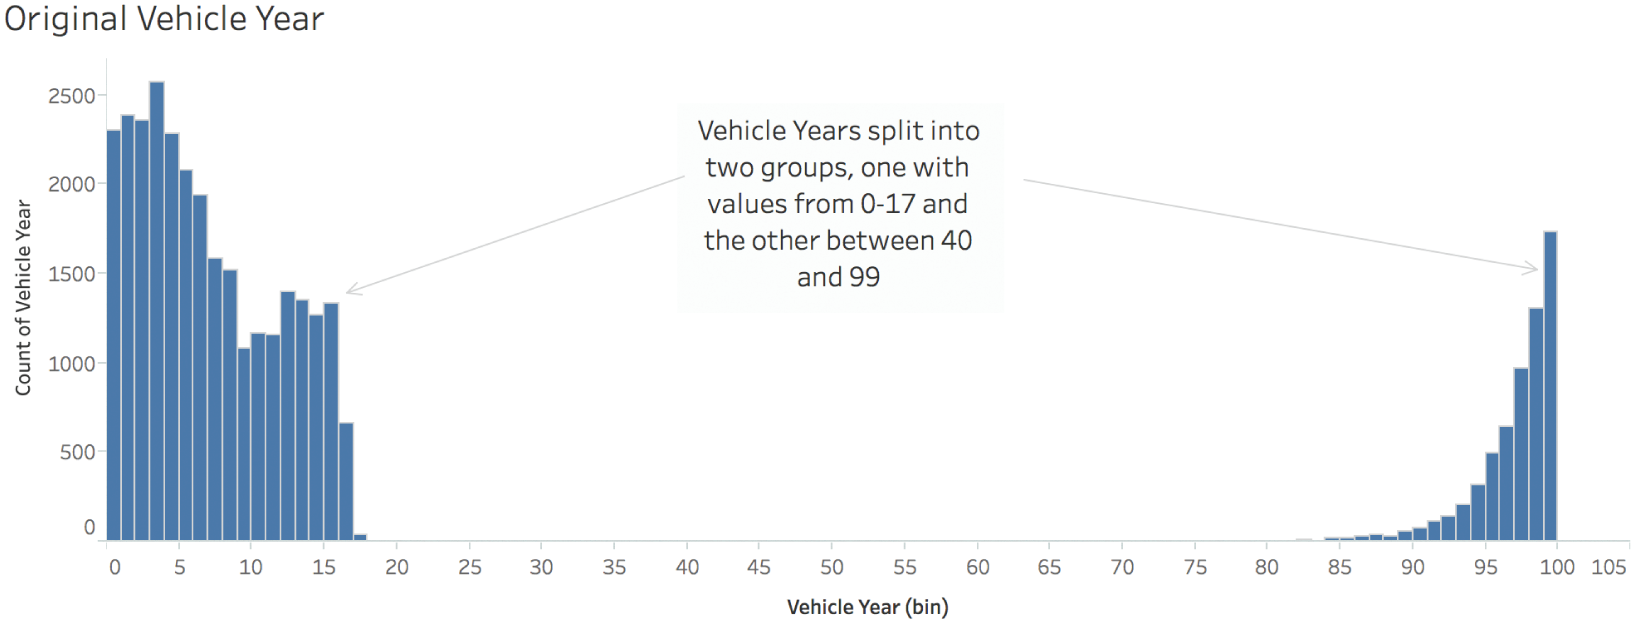 Histogram depicting the raw vehicle year data of vehicle years split into two groups, one with values from 0 to 17 and the other between 40 and 99.